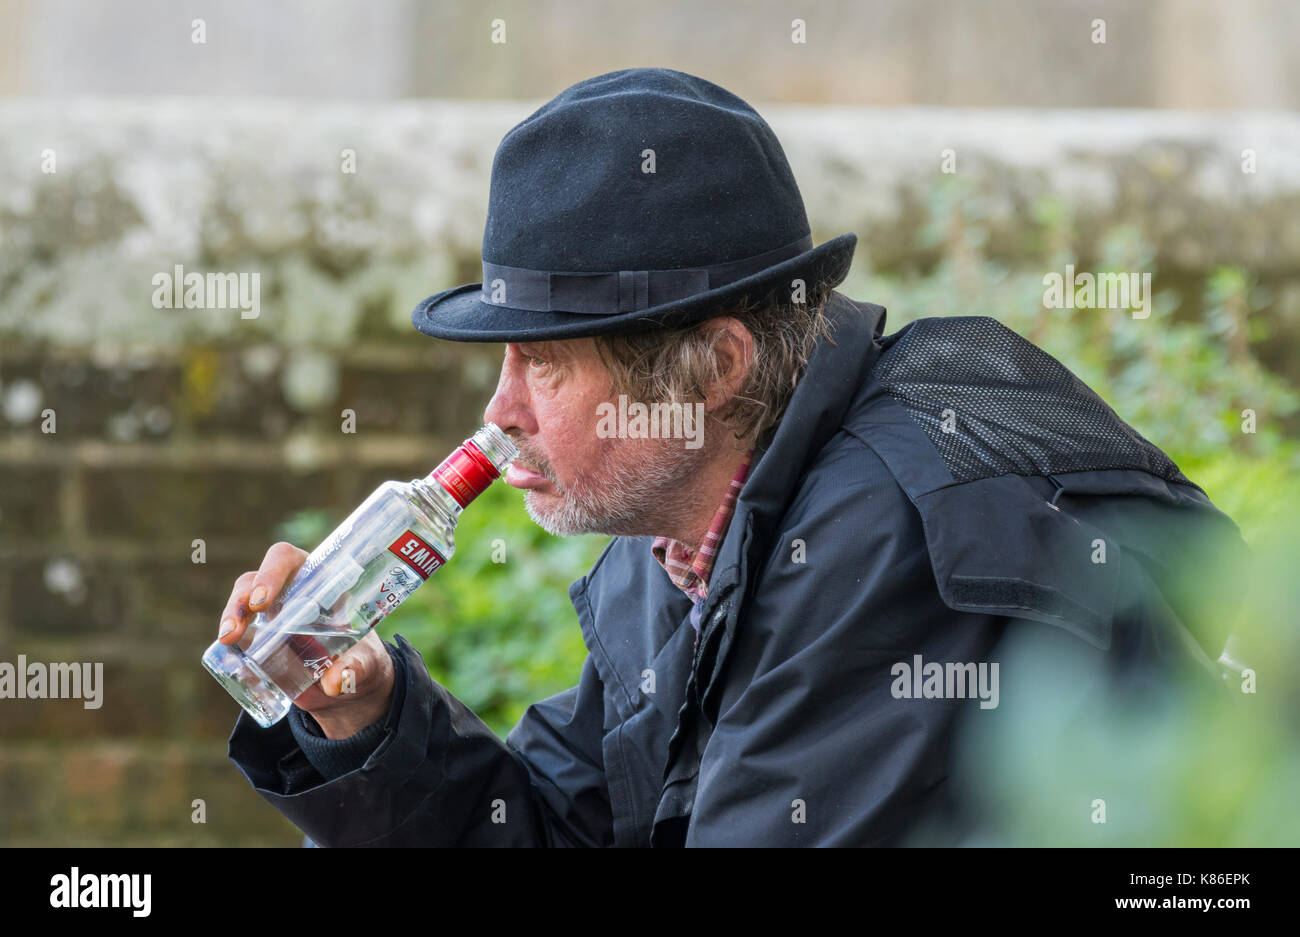 Man outside drinking in the daytime, appearing to be homeless, in the South of England, UK. Man drowning his sorrows. Stock Photo